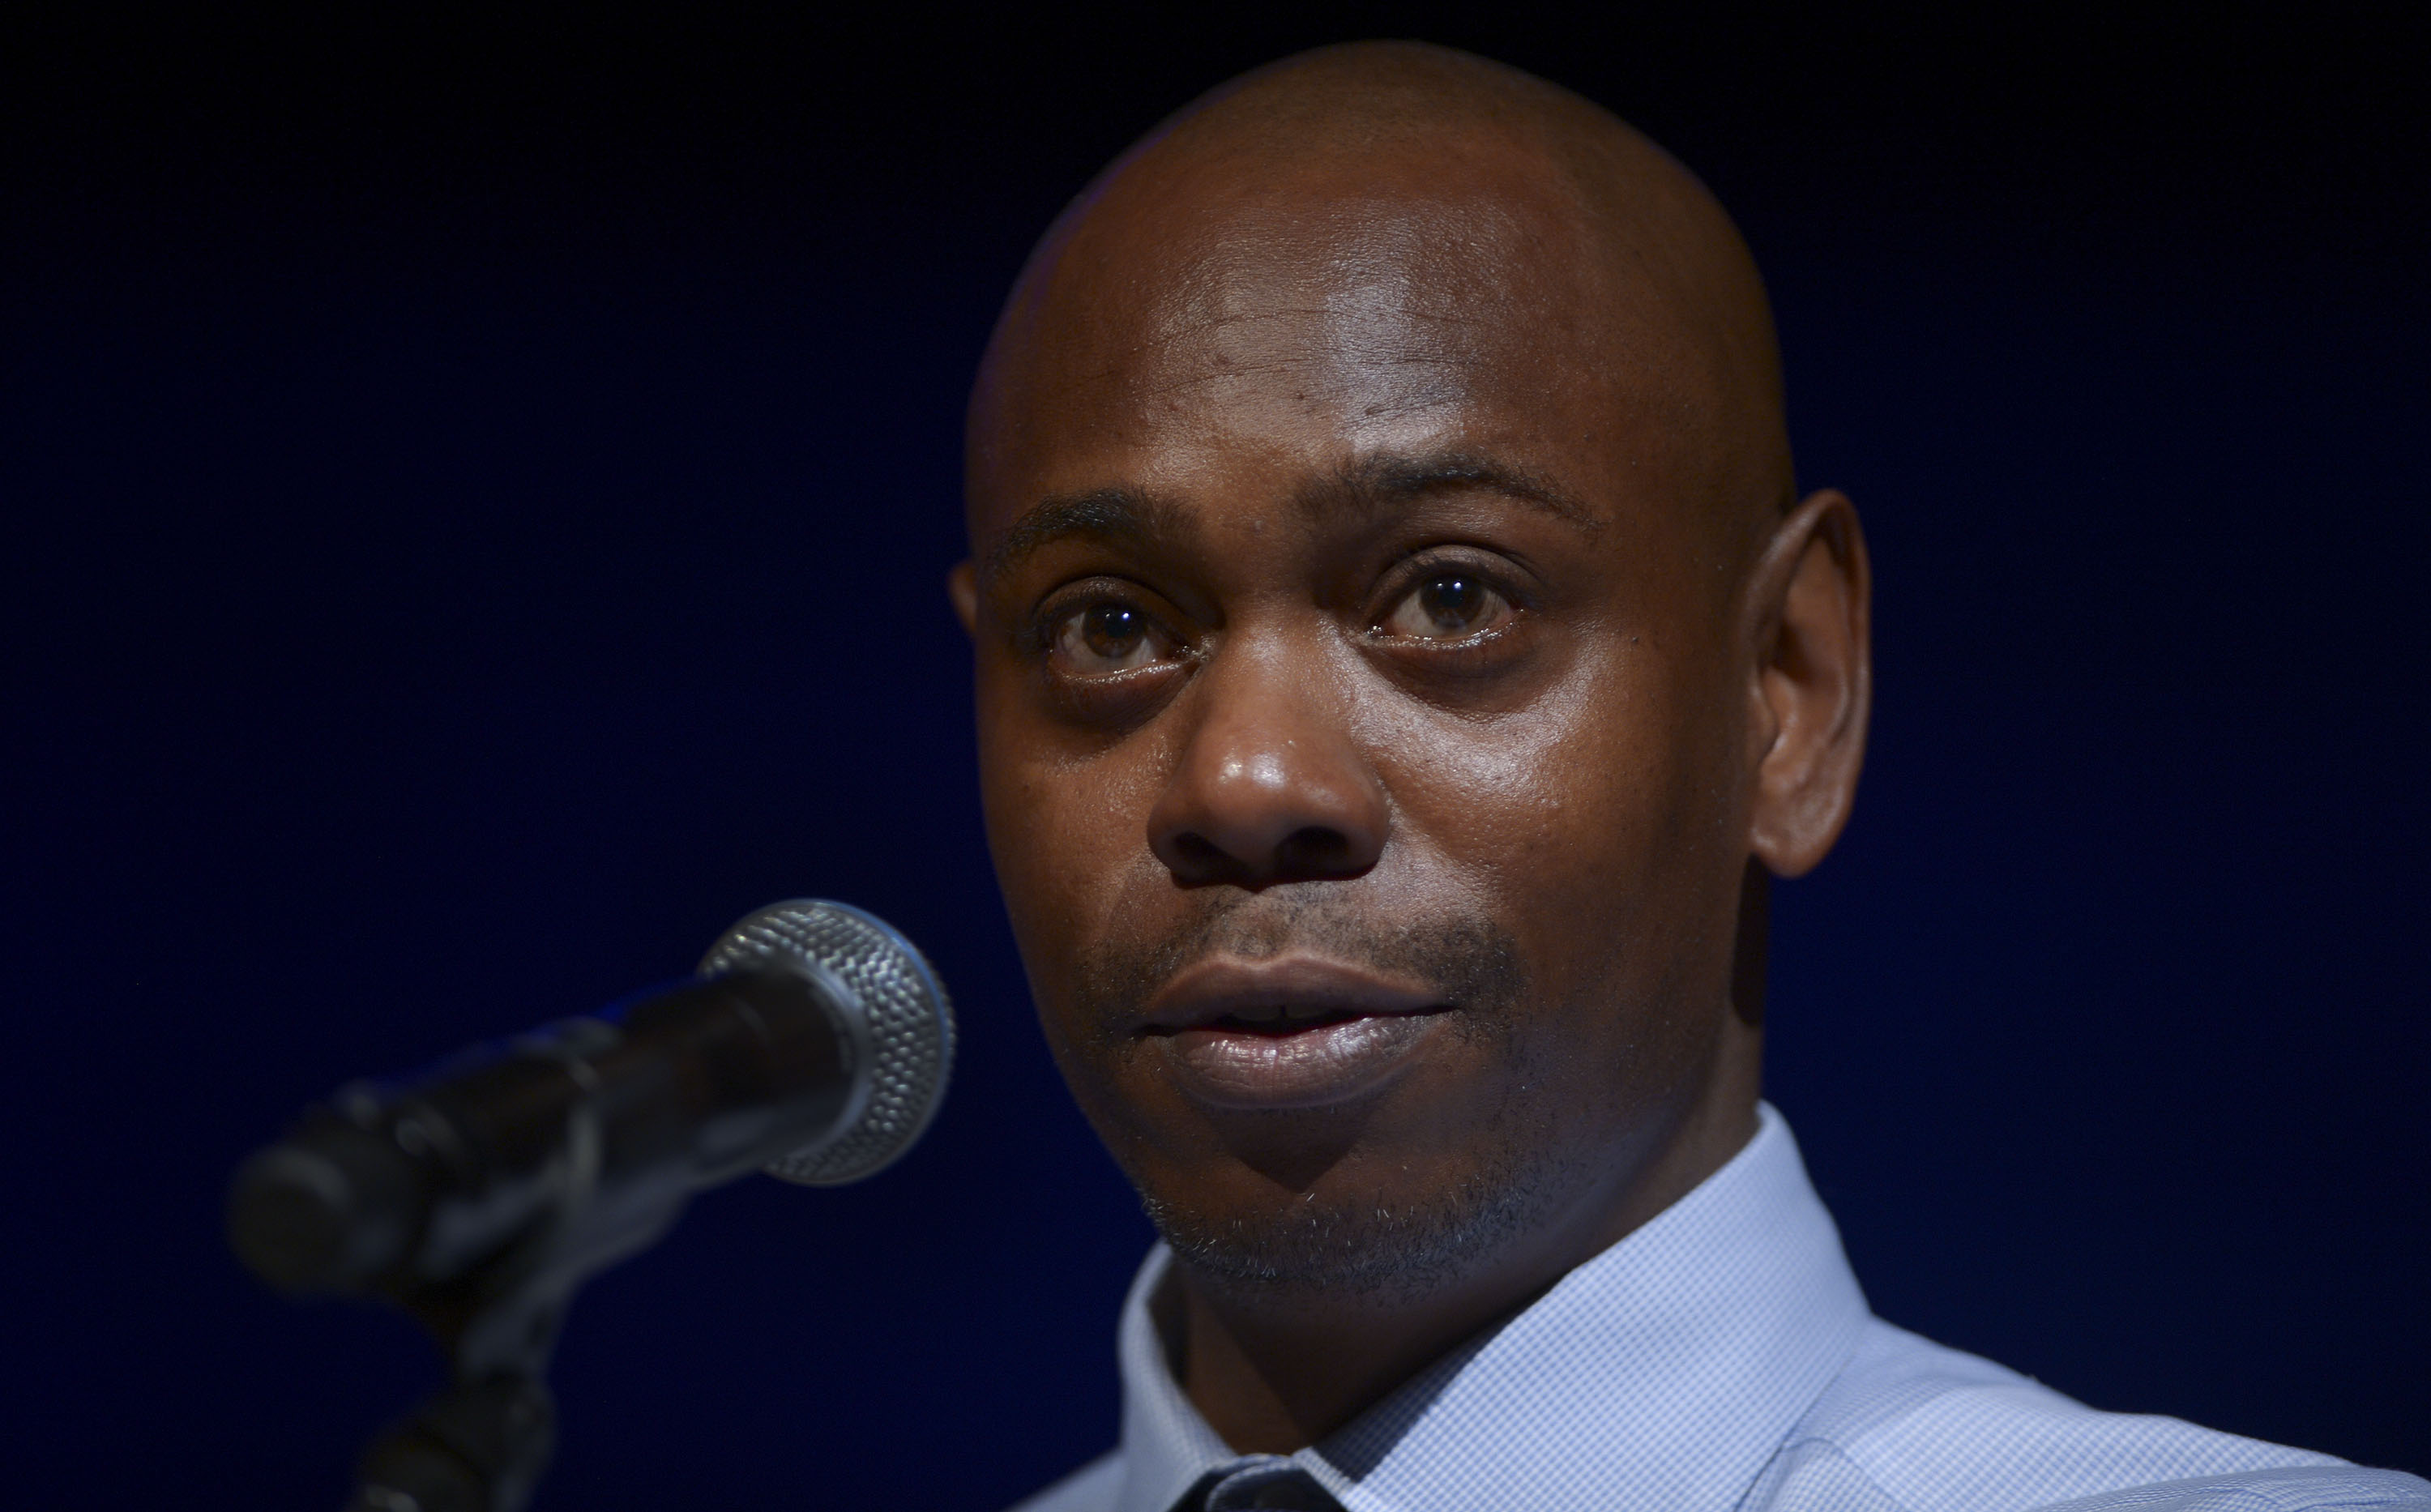 Dave Chappelle at an event